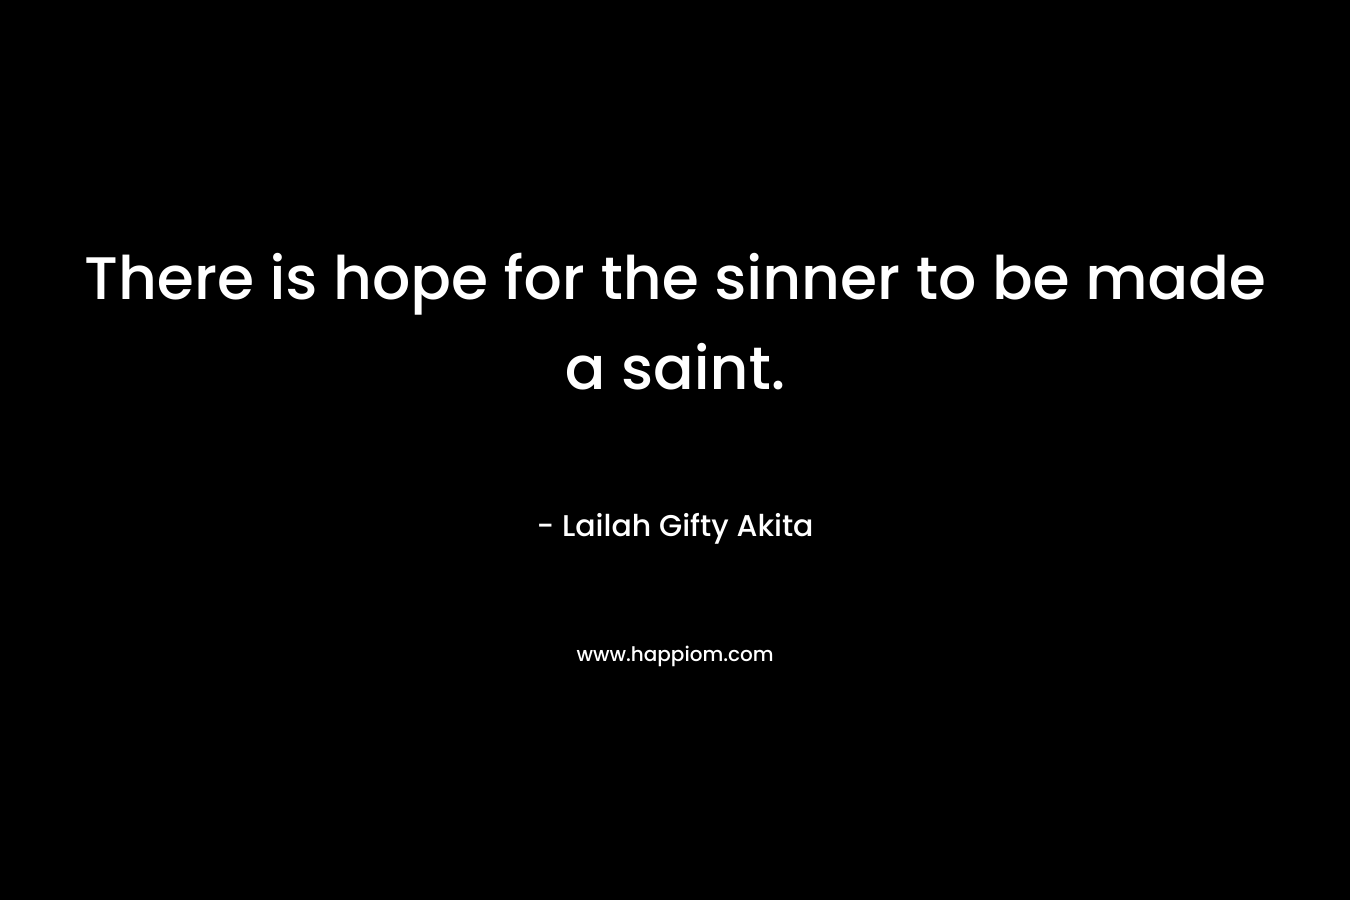 There is hope for the sinner to be made a saint.